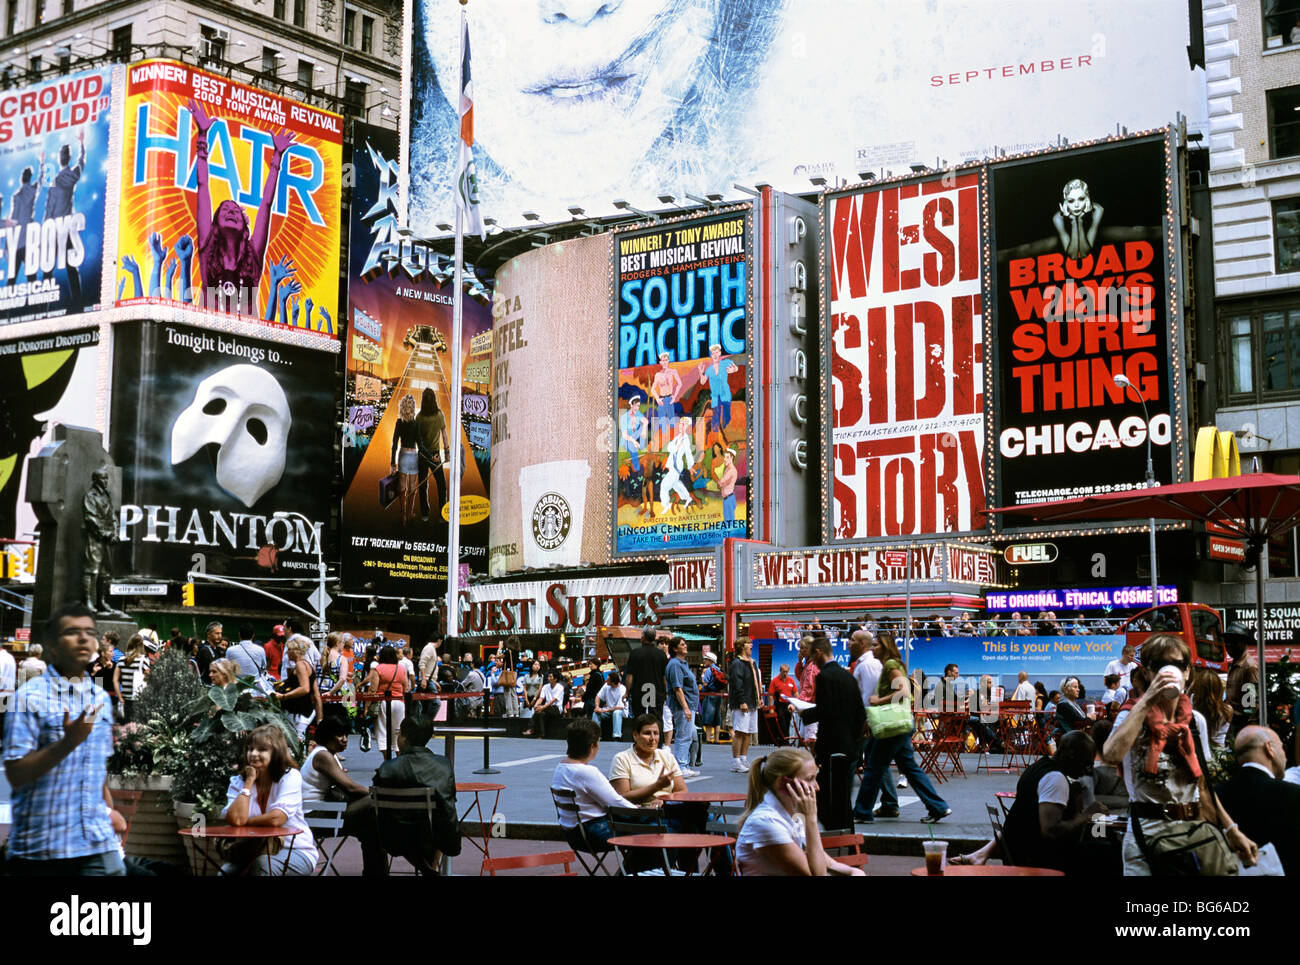 Giant adverts for Broadway shows and musicals, Duffy Square (next to Times Square), New York City Stock Photo